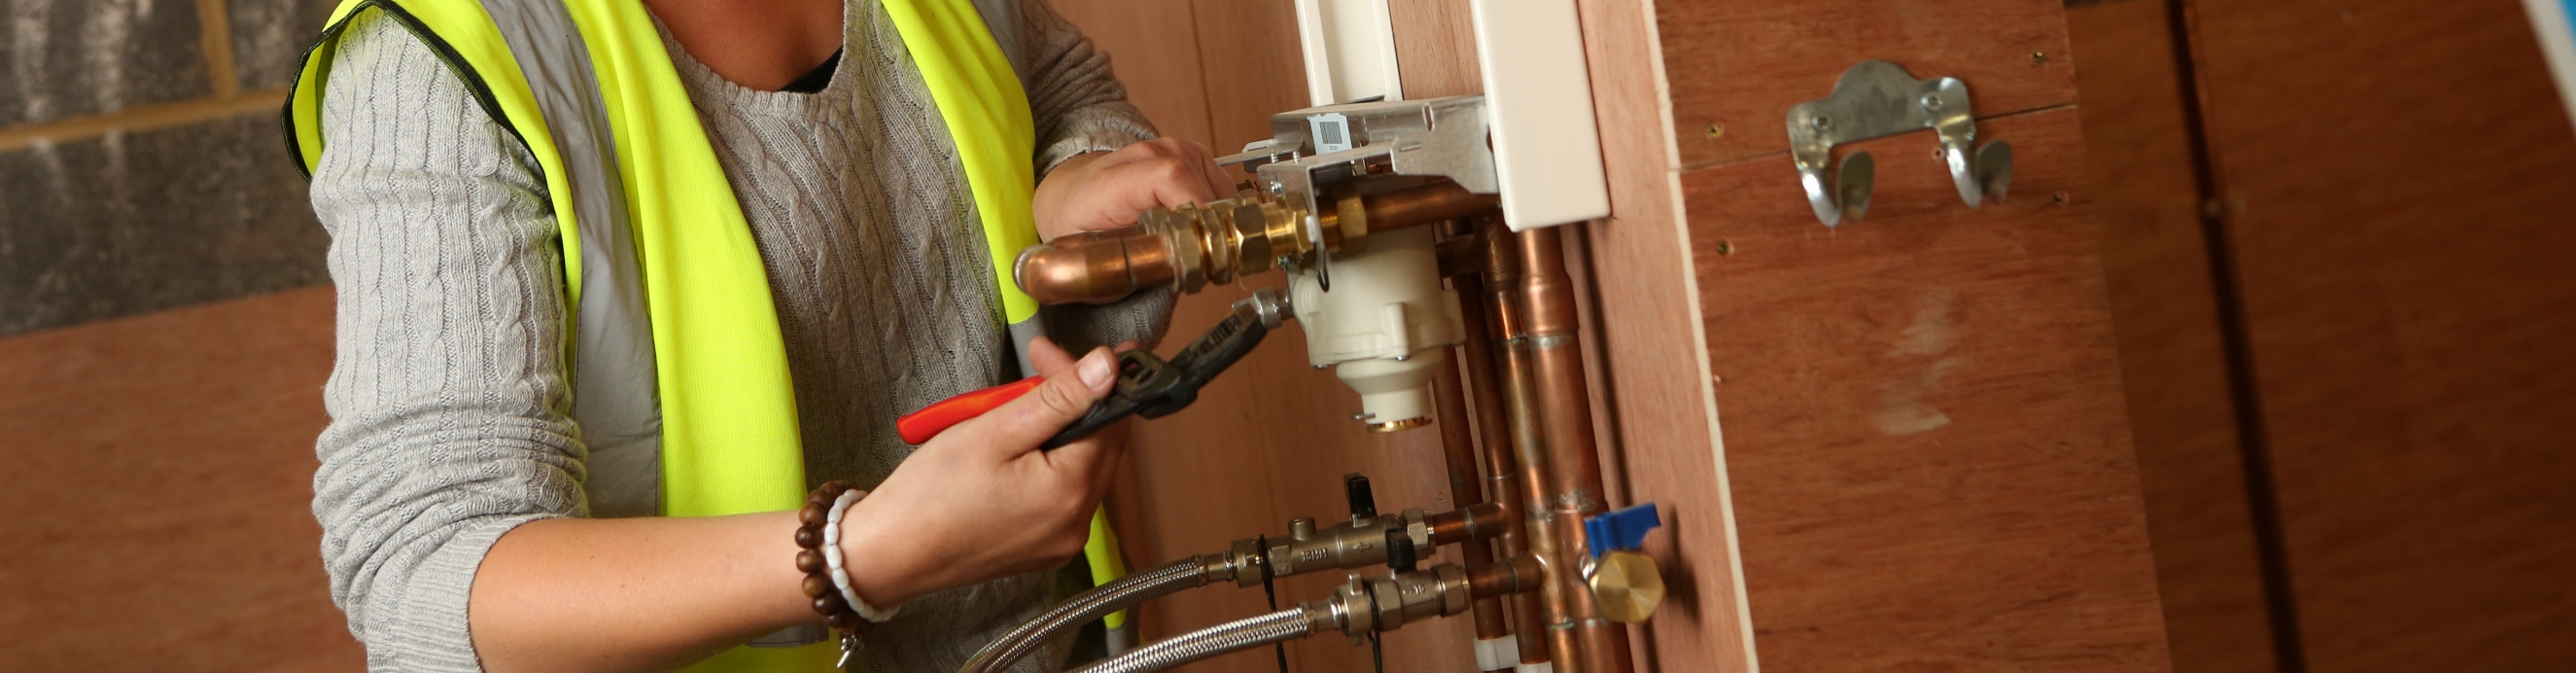 plumbing courses bristol somerset south west